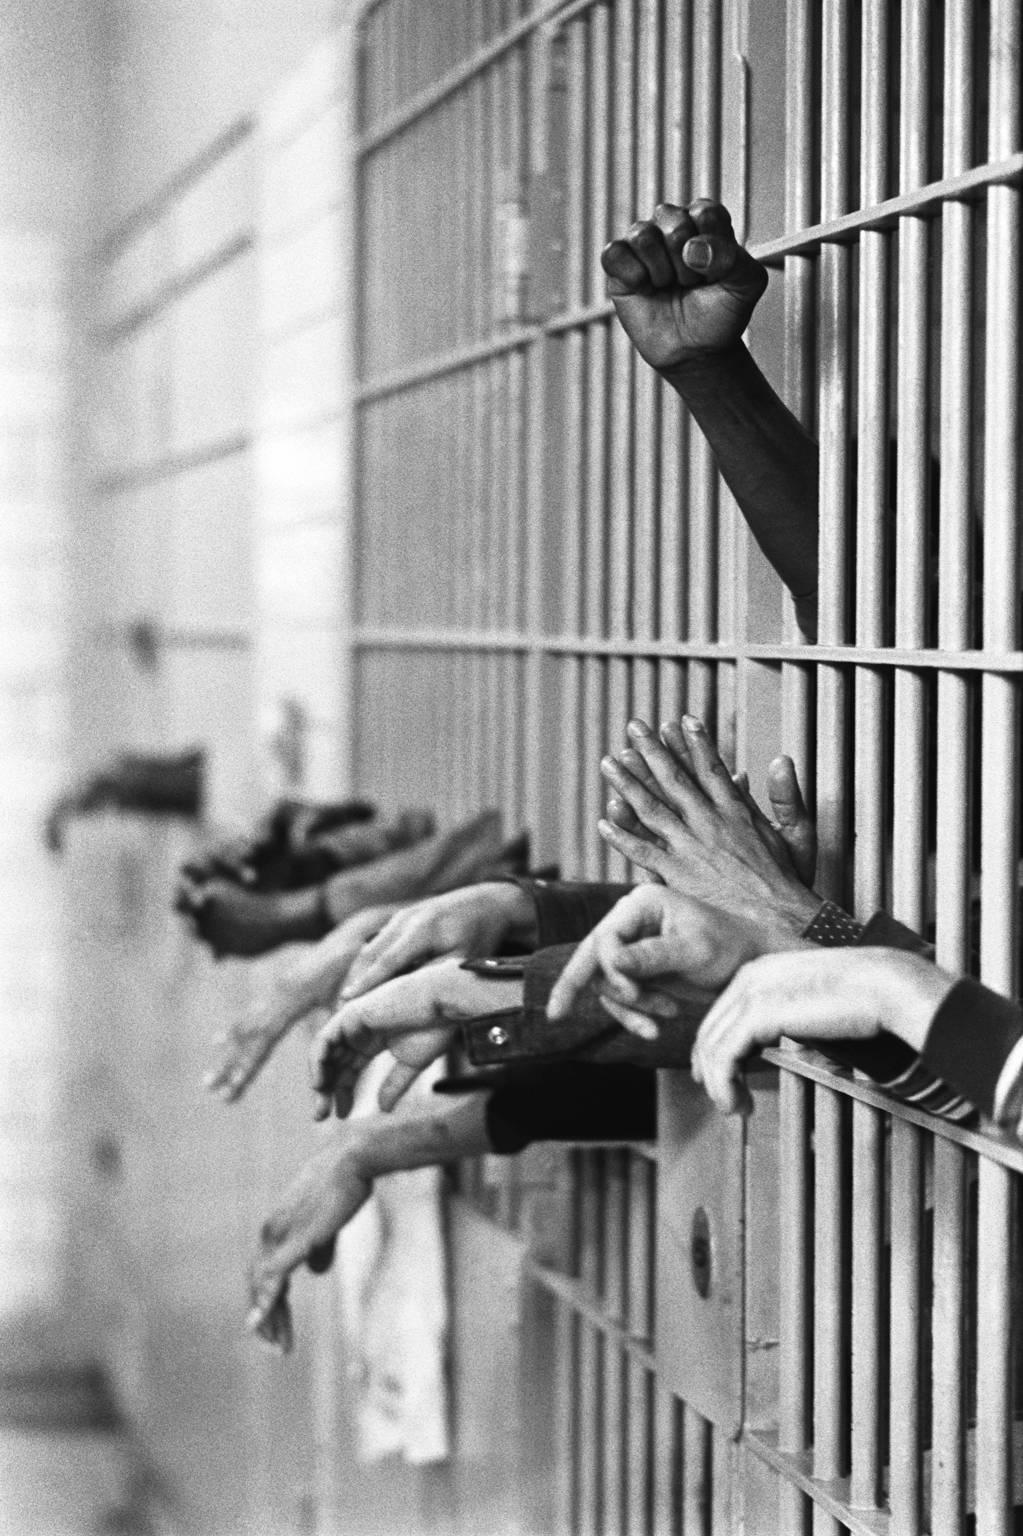 Jean-Pierre Laffont Black and White Photograph - 3 moods in US prisons: Rebellion, prayer, and abandon. Tombs Prison, Manhattan, 